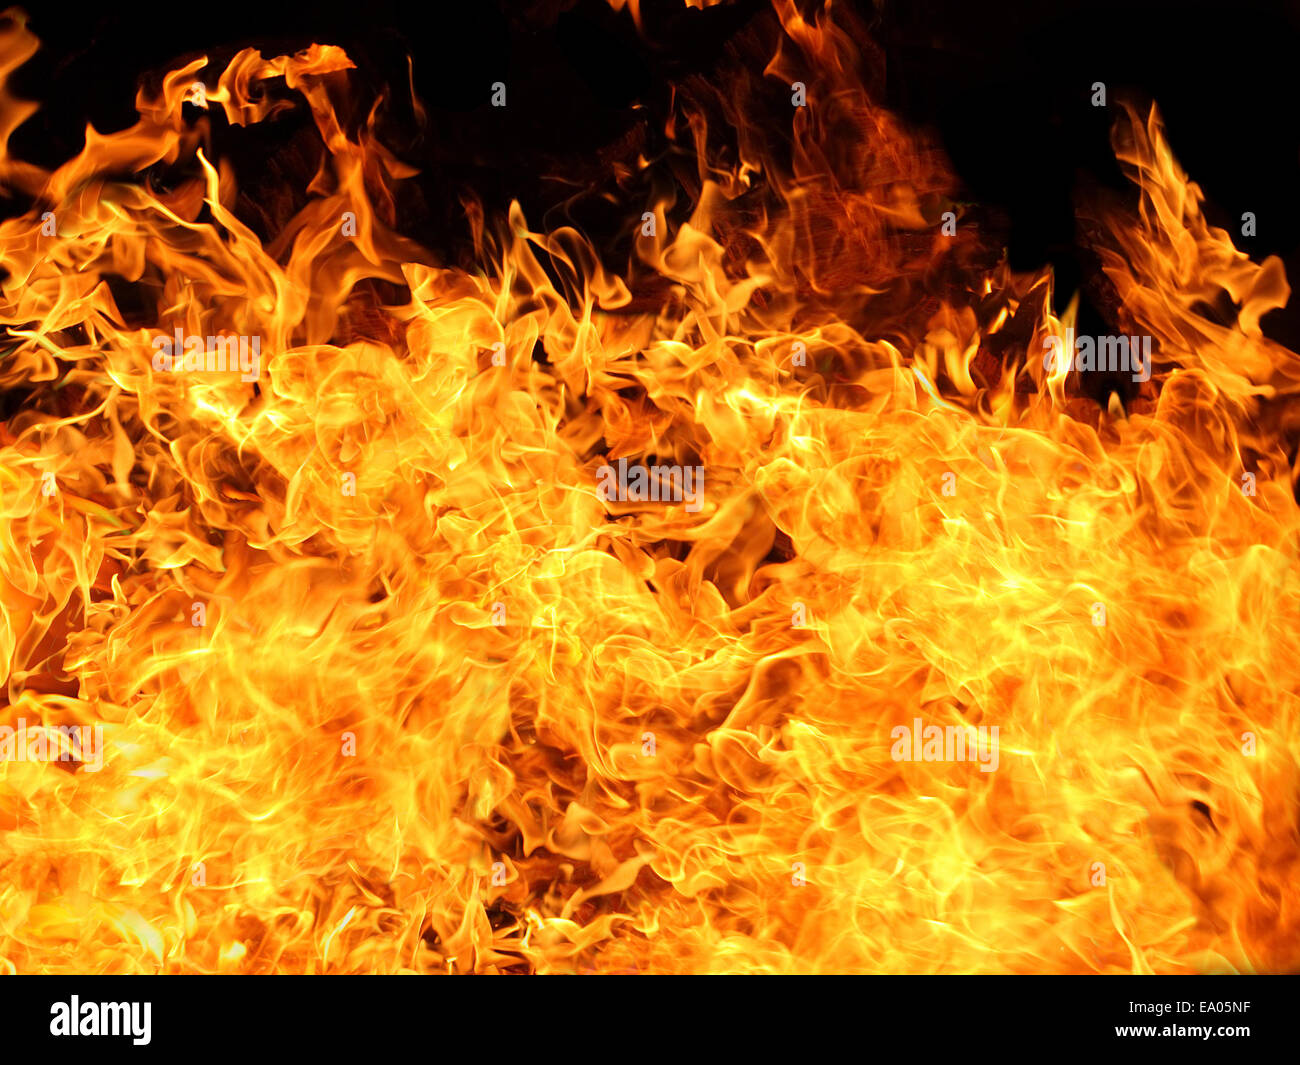 Fire flames background texture Stock Photo